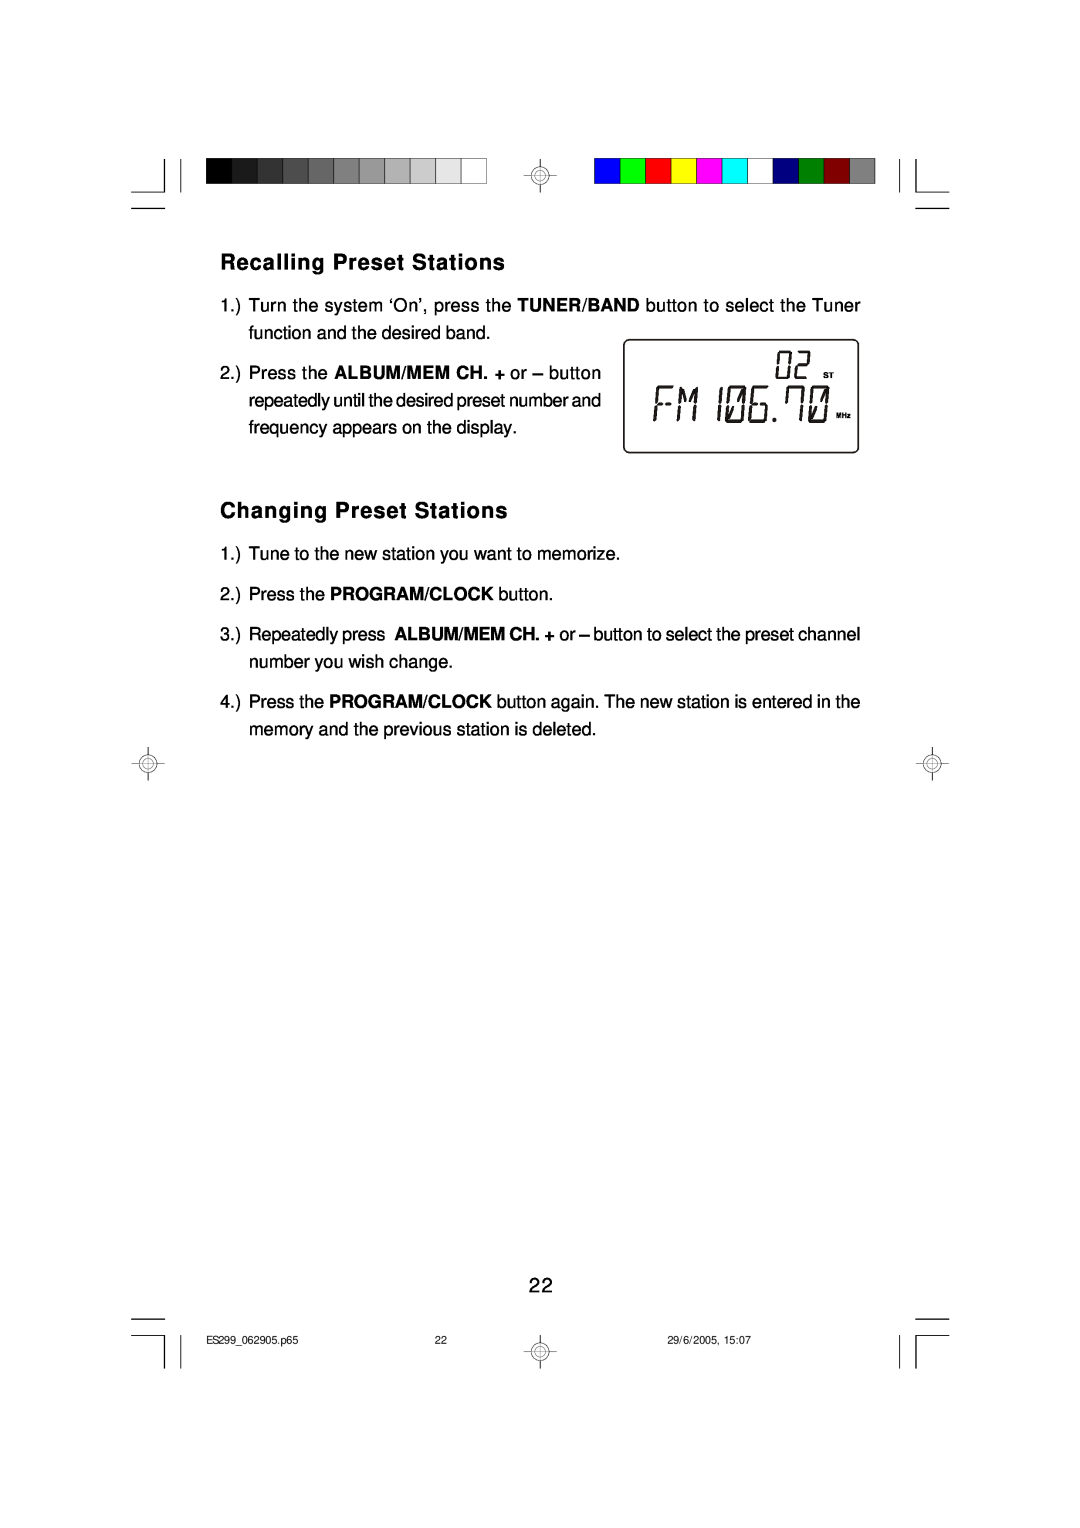 Emerson ES299 owner manual Recalling Preset Stations, Changing Preset Stations 